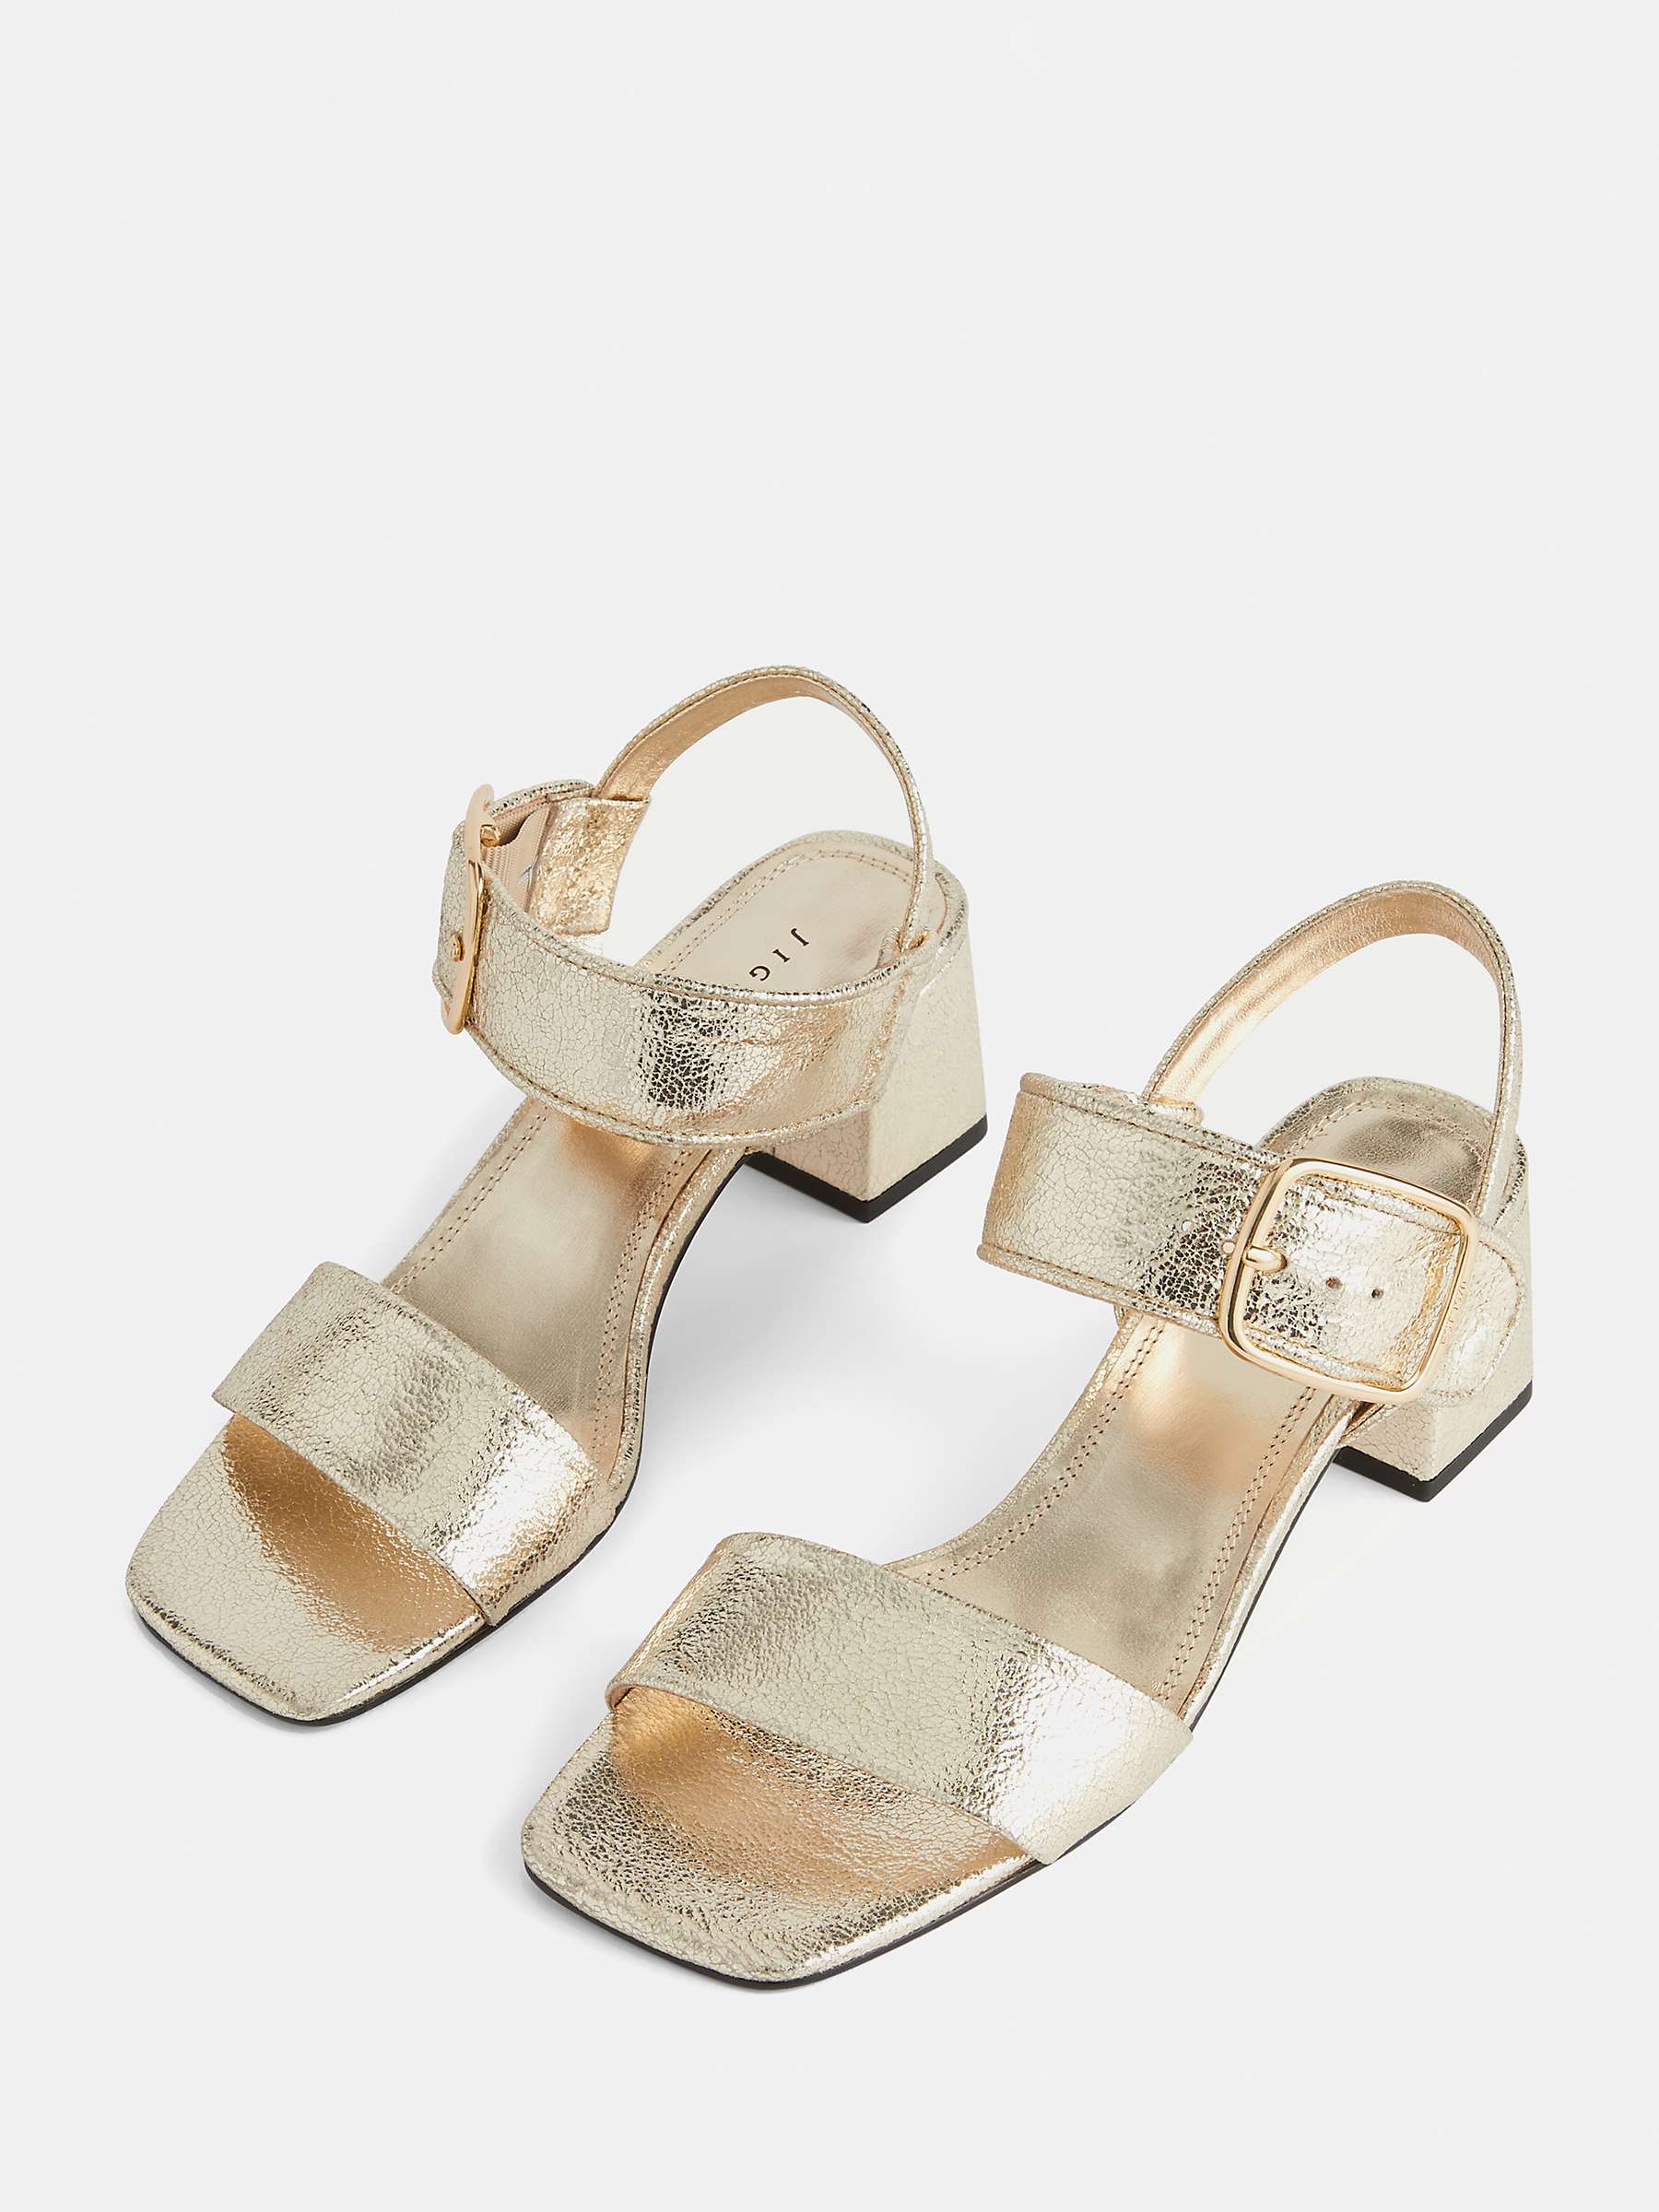 Buy Jigsaw Maybell Leather Block Heel Sandals Online at johnlewis.com